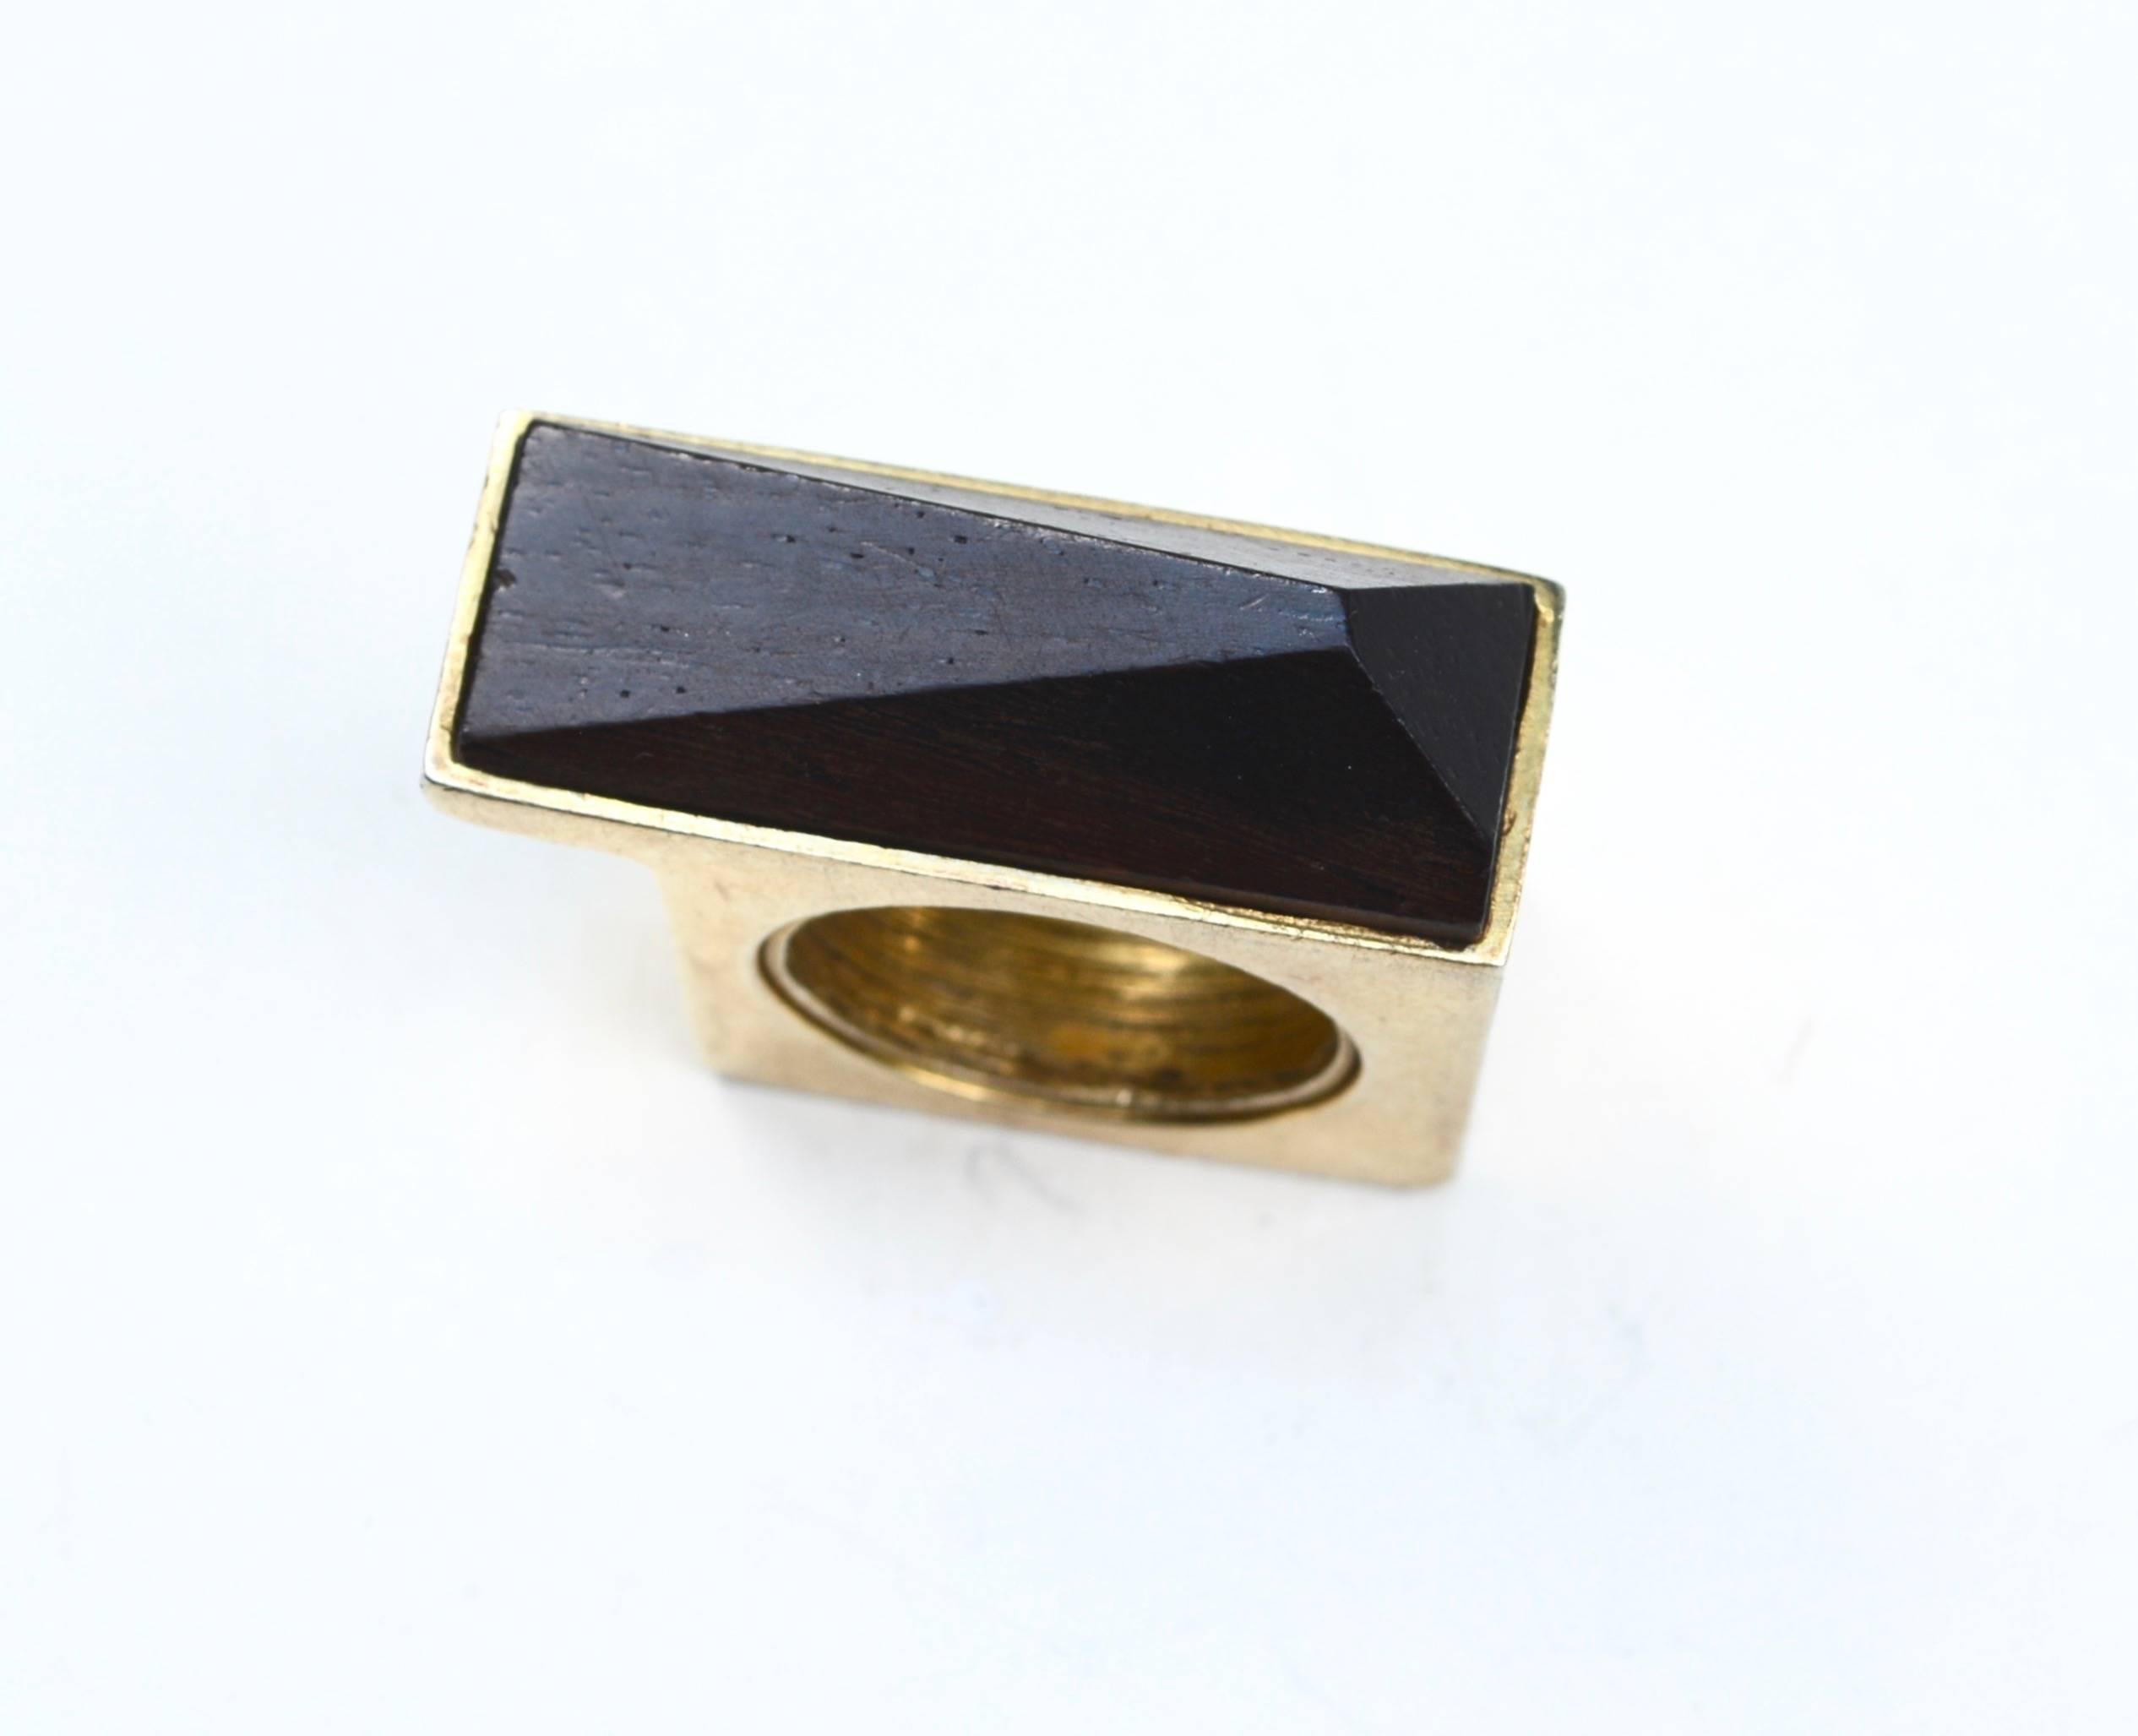 Modernist 1970s wooden sterling and gold wash ring in a larger size. Probably originally a man's. It fits my center finger. Size 8.5. Square section of the ring measures about 1.25